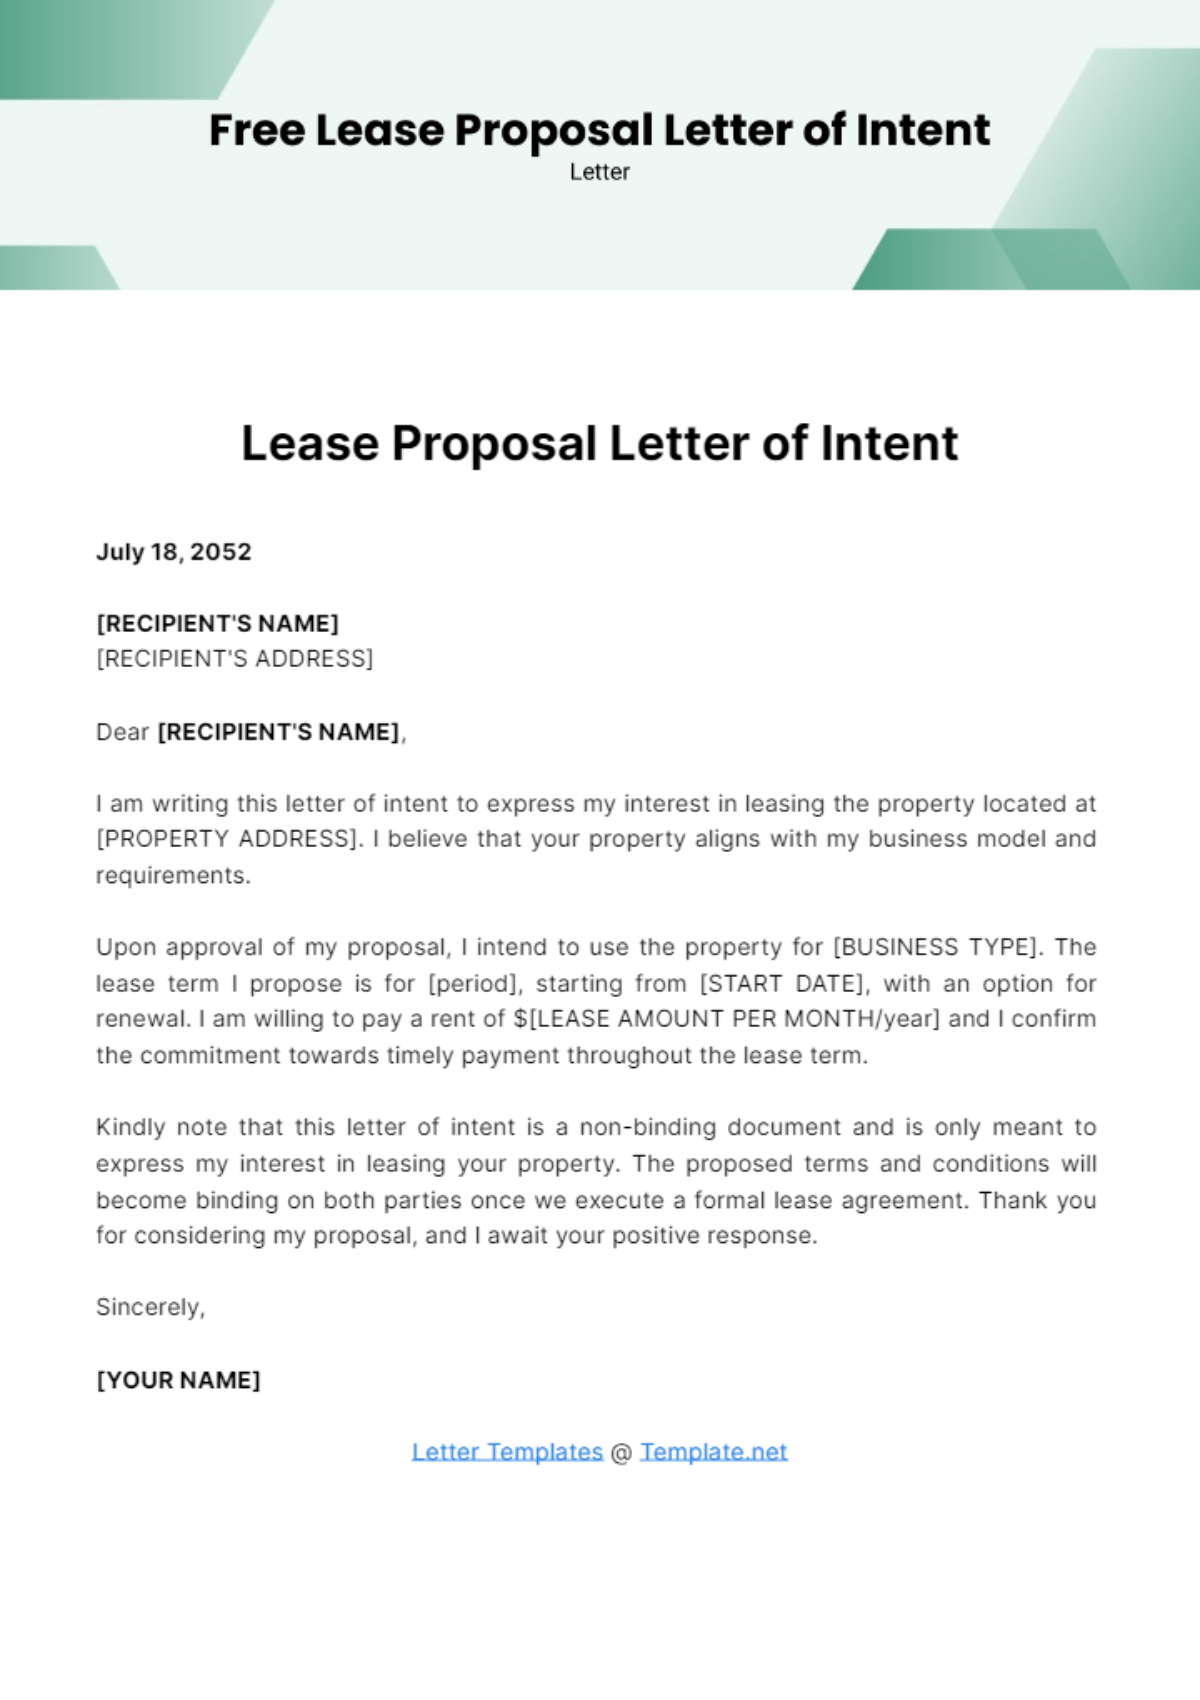 Free Lease Proposal Letter of Intent Template